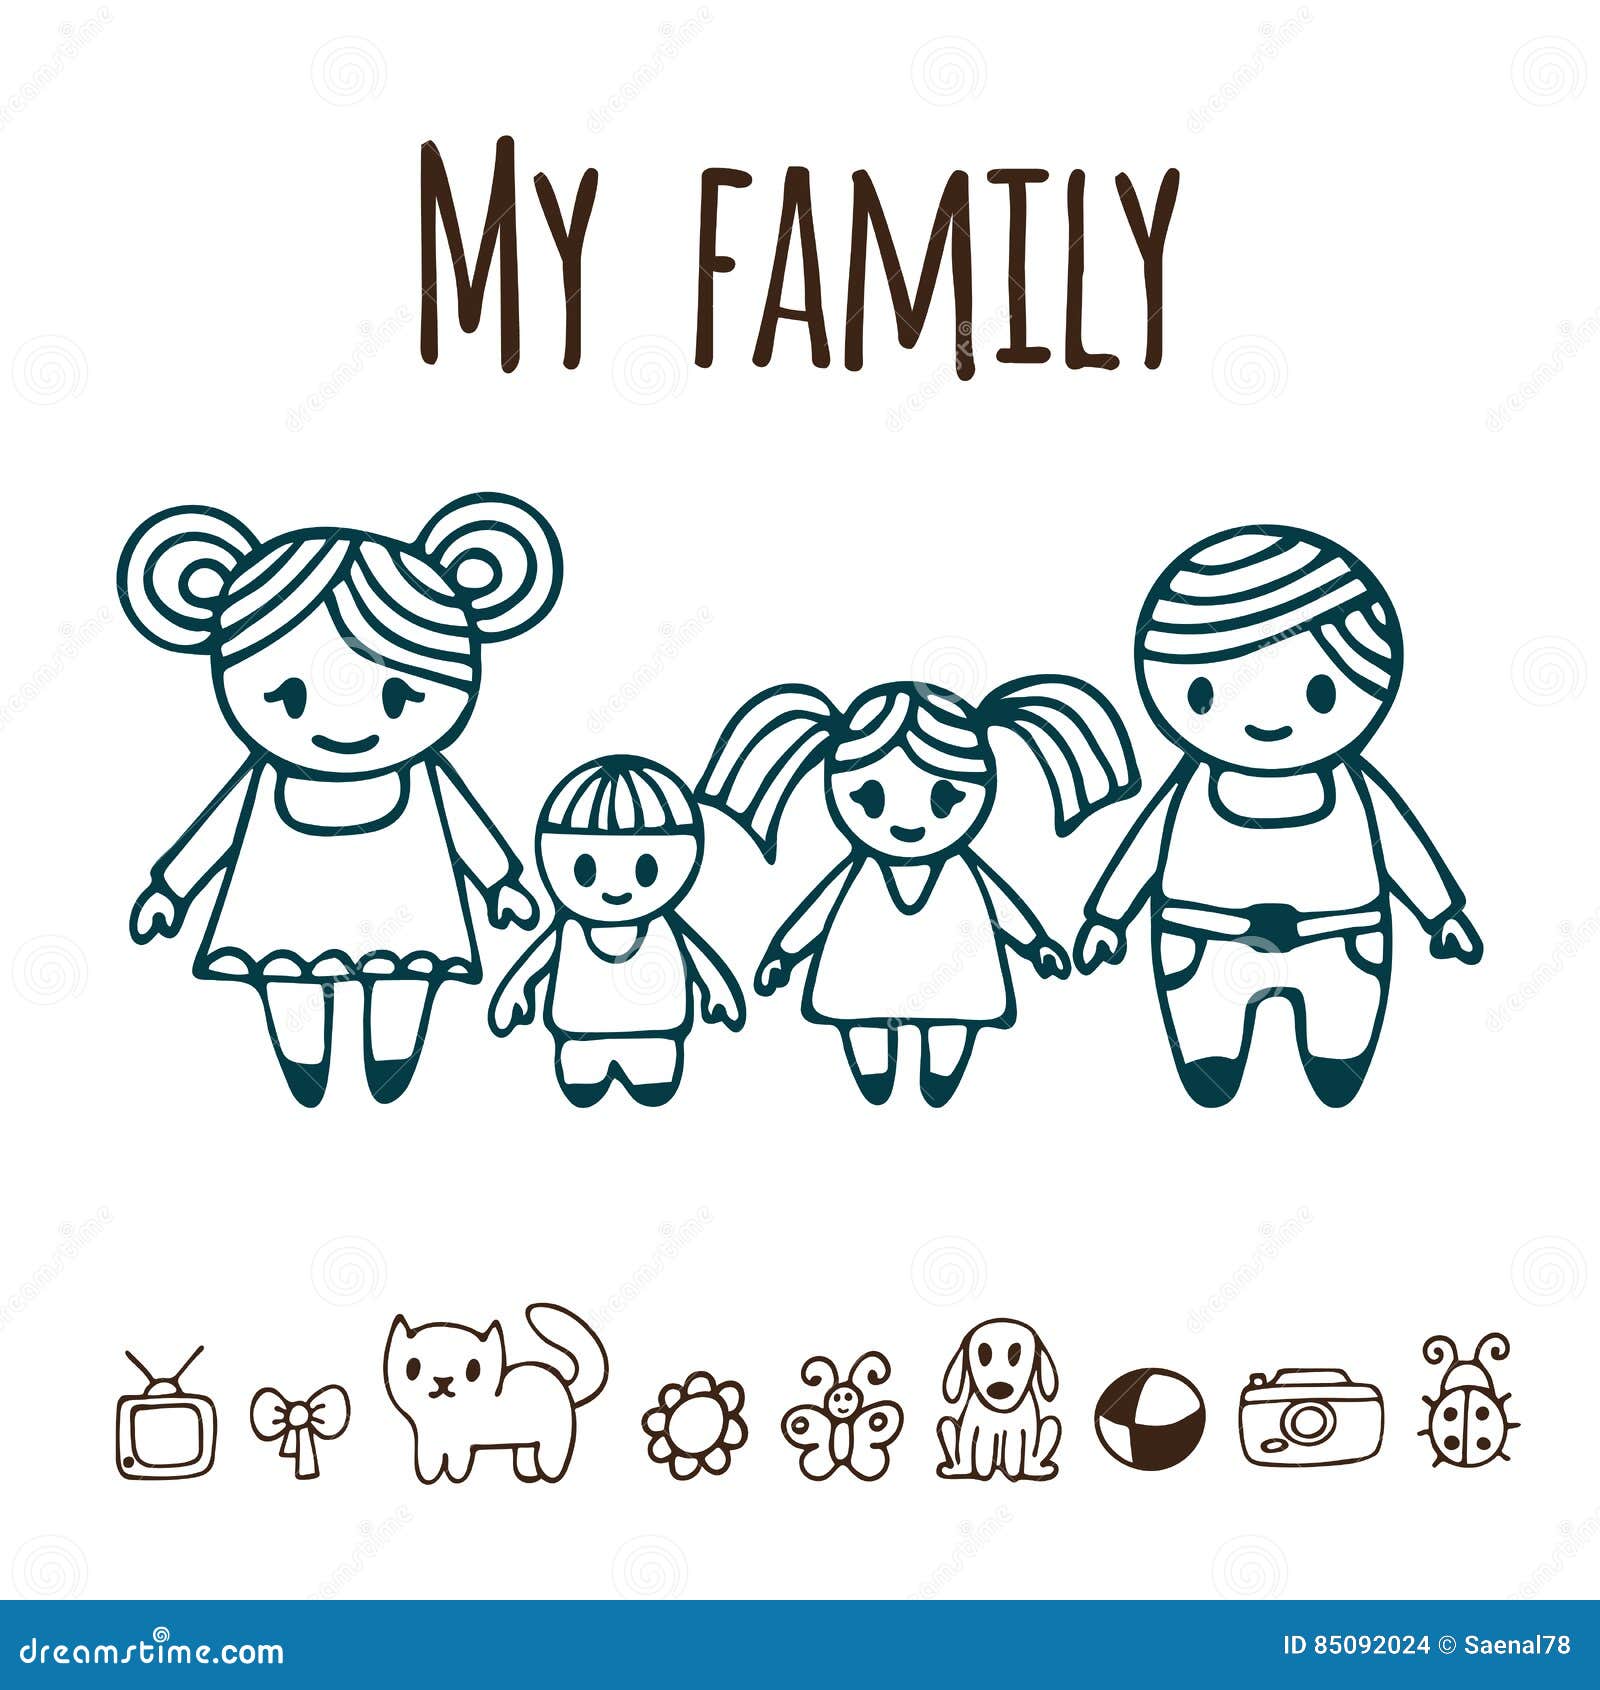 How To Draw My Family  My Family Drawing  Family Drawing Easy  Drawing  For Kids  Smart Kids Art  YouTube